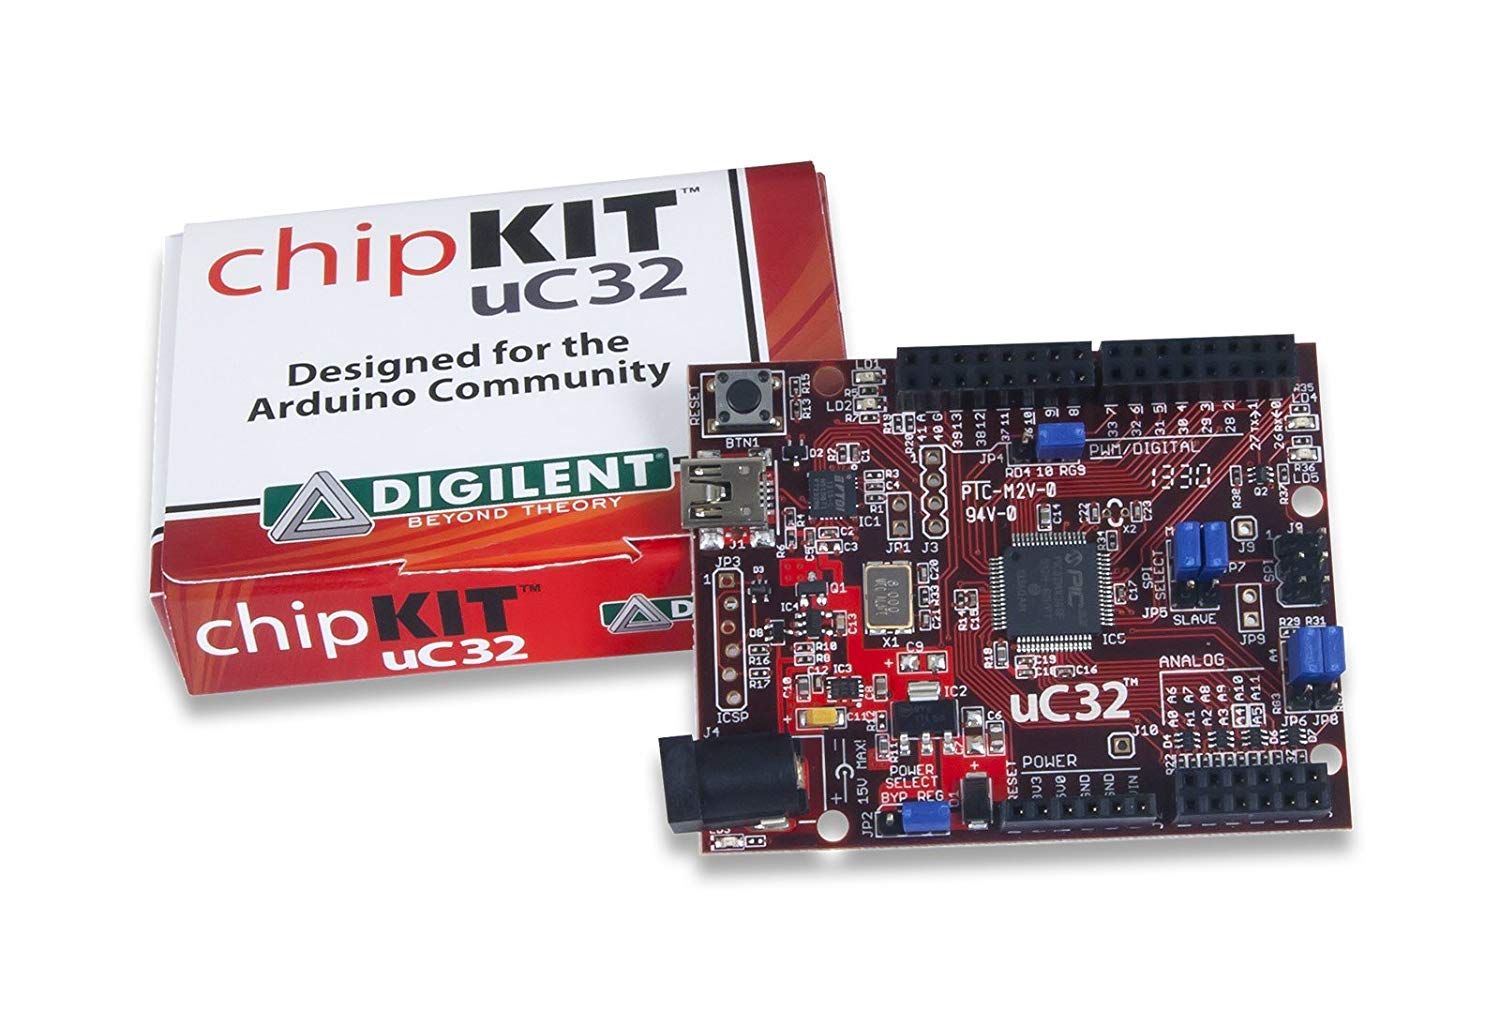 Digilent chipKIT uC32 Basic Microcontroller Board with Uno R3 Headers - 410-254